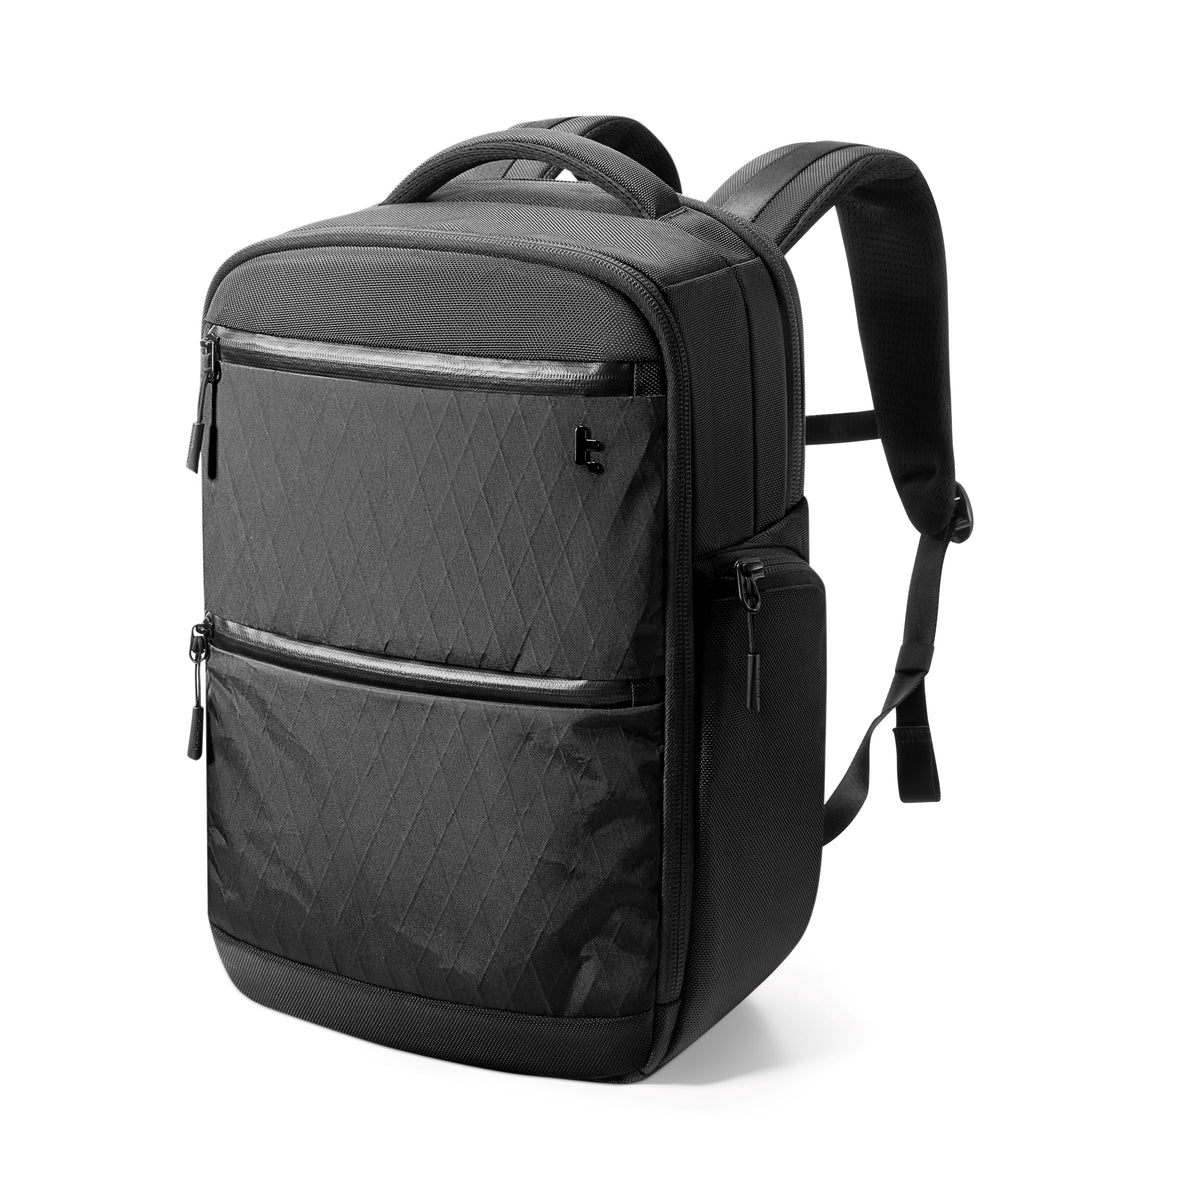 TechPack-T73 X-Pac Laptop Backpack S 15.6-inch